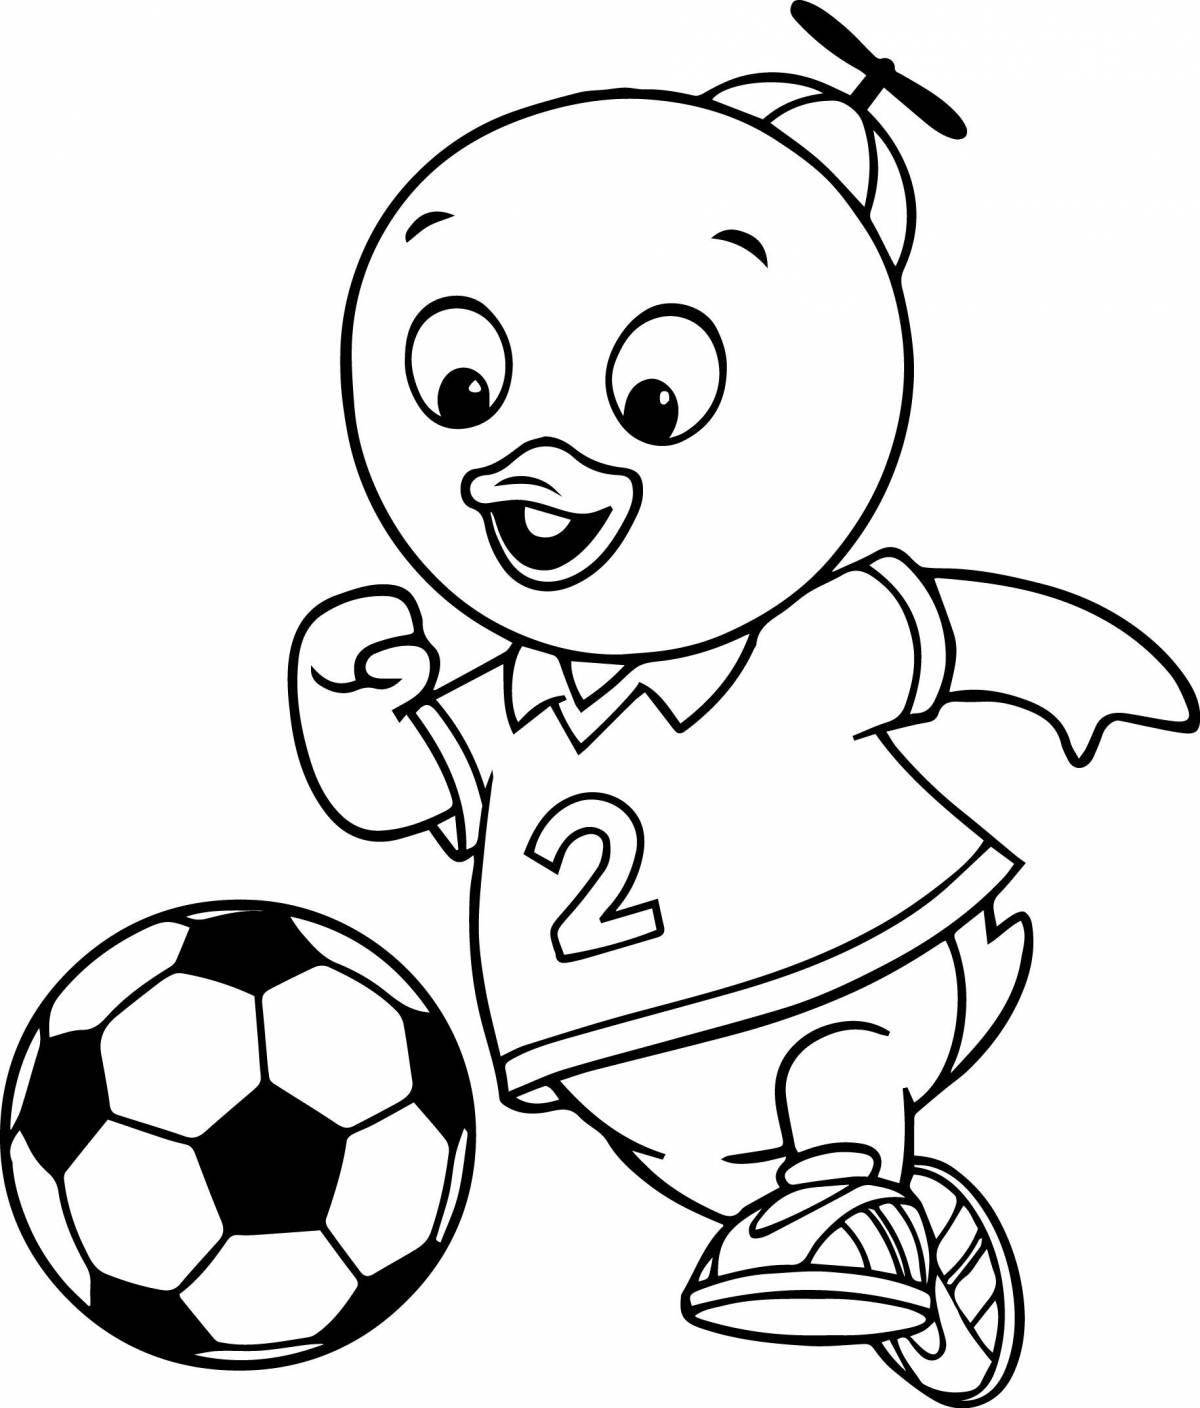 Incredible football coloring book for kids